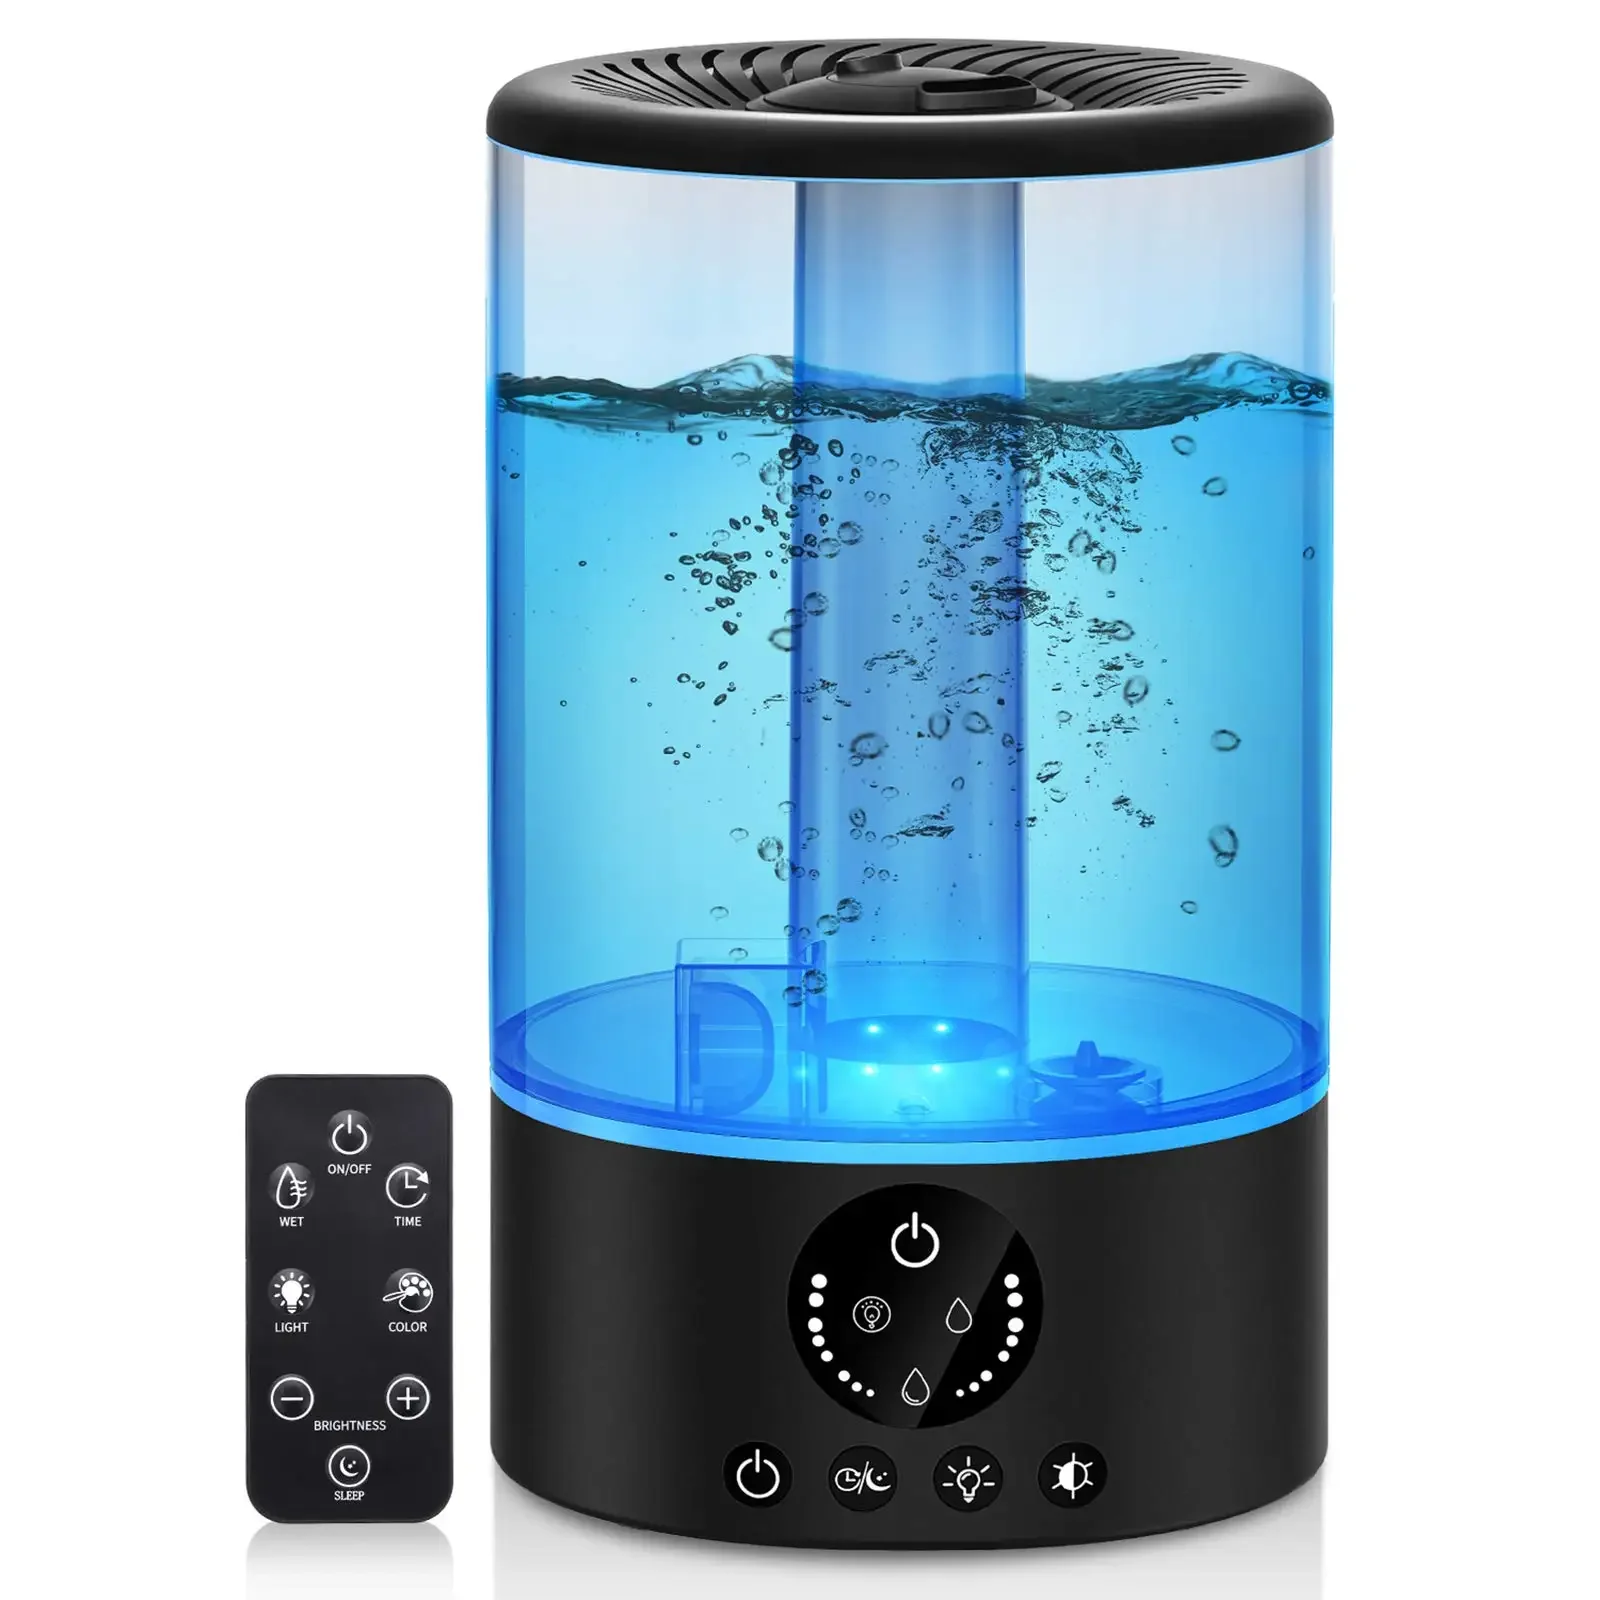 Cool Mist Humidifier, Ultrasonic Humidifiers for Bedroom Baby, 3L Large Humidifier w/ Remote Control, 7 Colors Night Light 6 Dim dreams cool mist ultrasonic humidifier vul575 jellyfish cloud humidifier diffuser essential oil diffuser diffuser essential oil